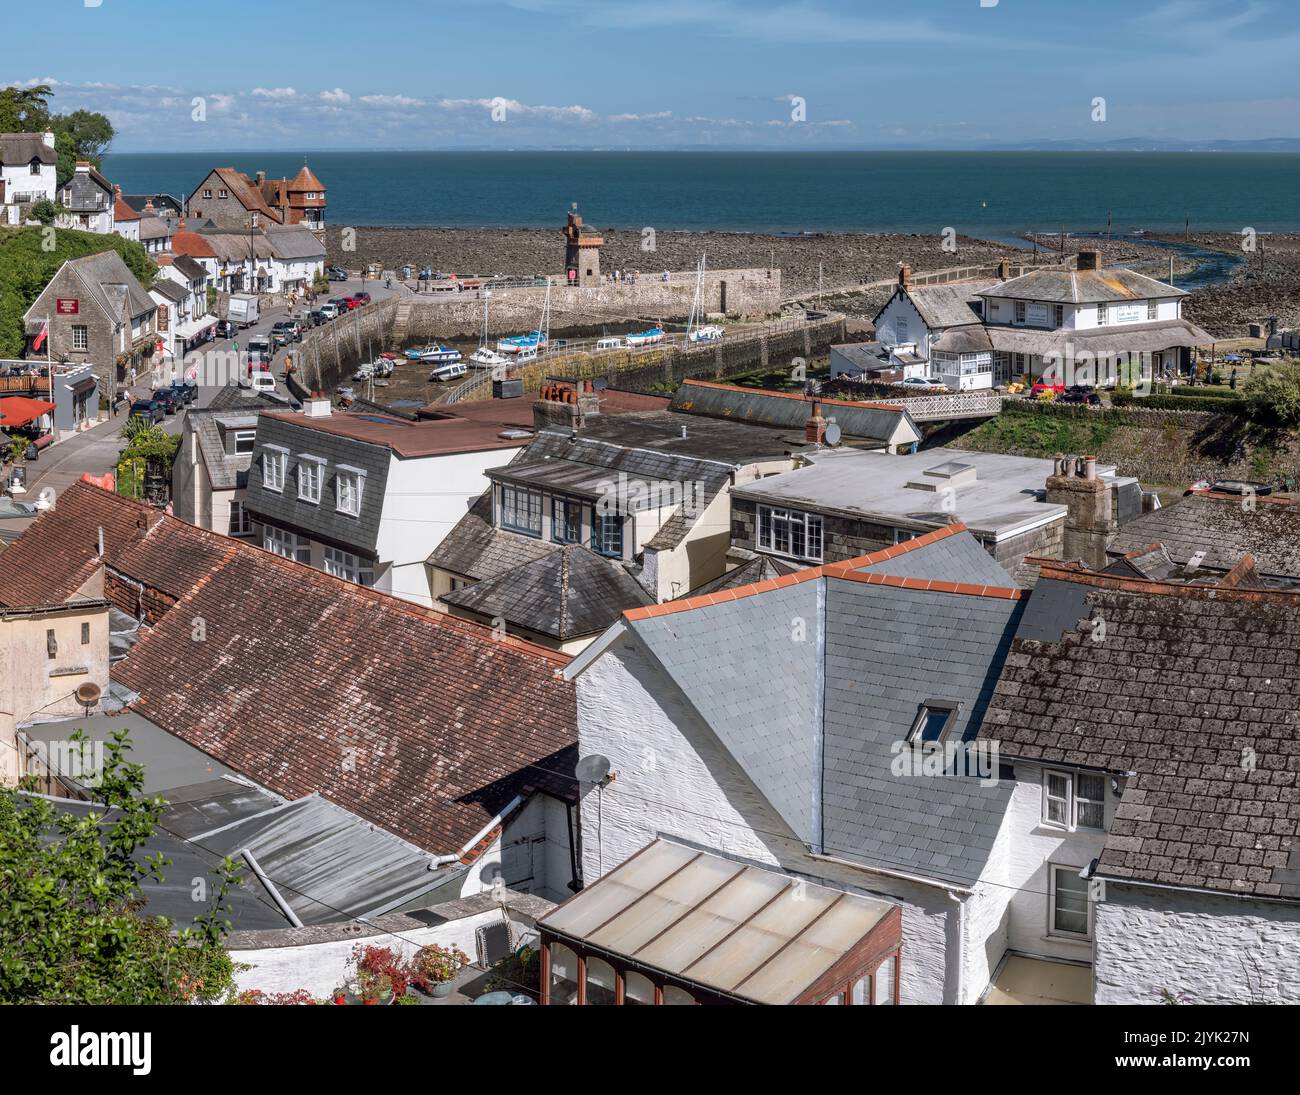 The picturesque North Devon seaside village of Lynmouth sits at the confluence of the East and West Lyn rivers and is connected to Lynton, 210 metres Stock Photo